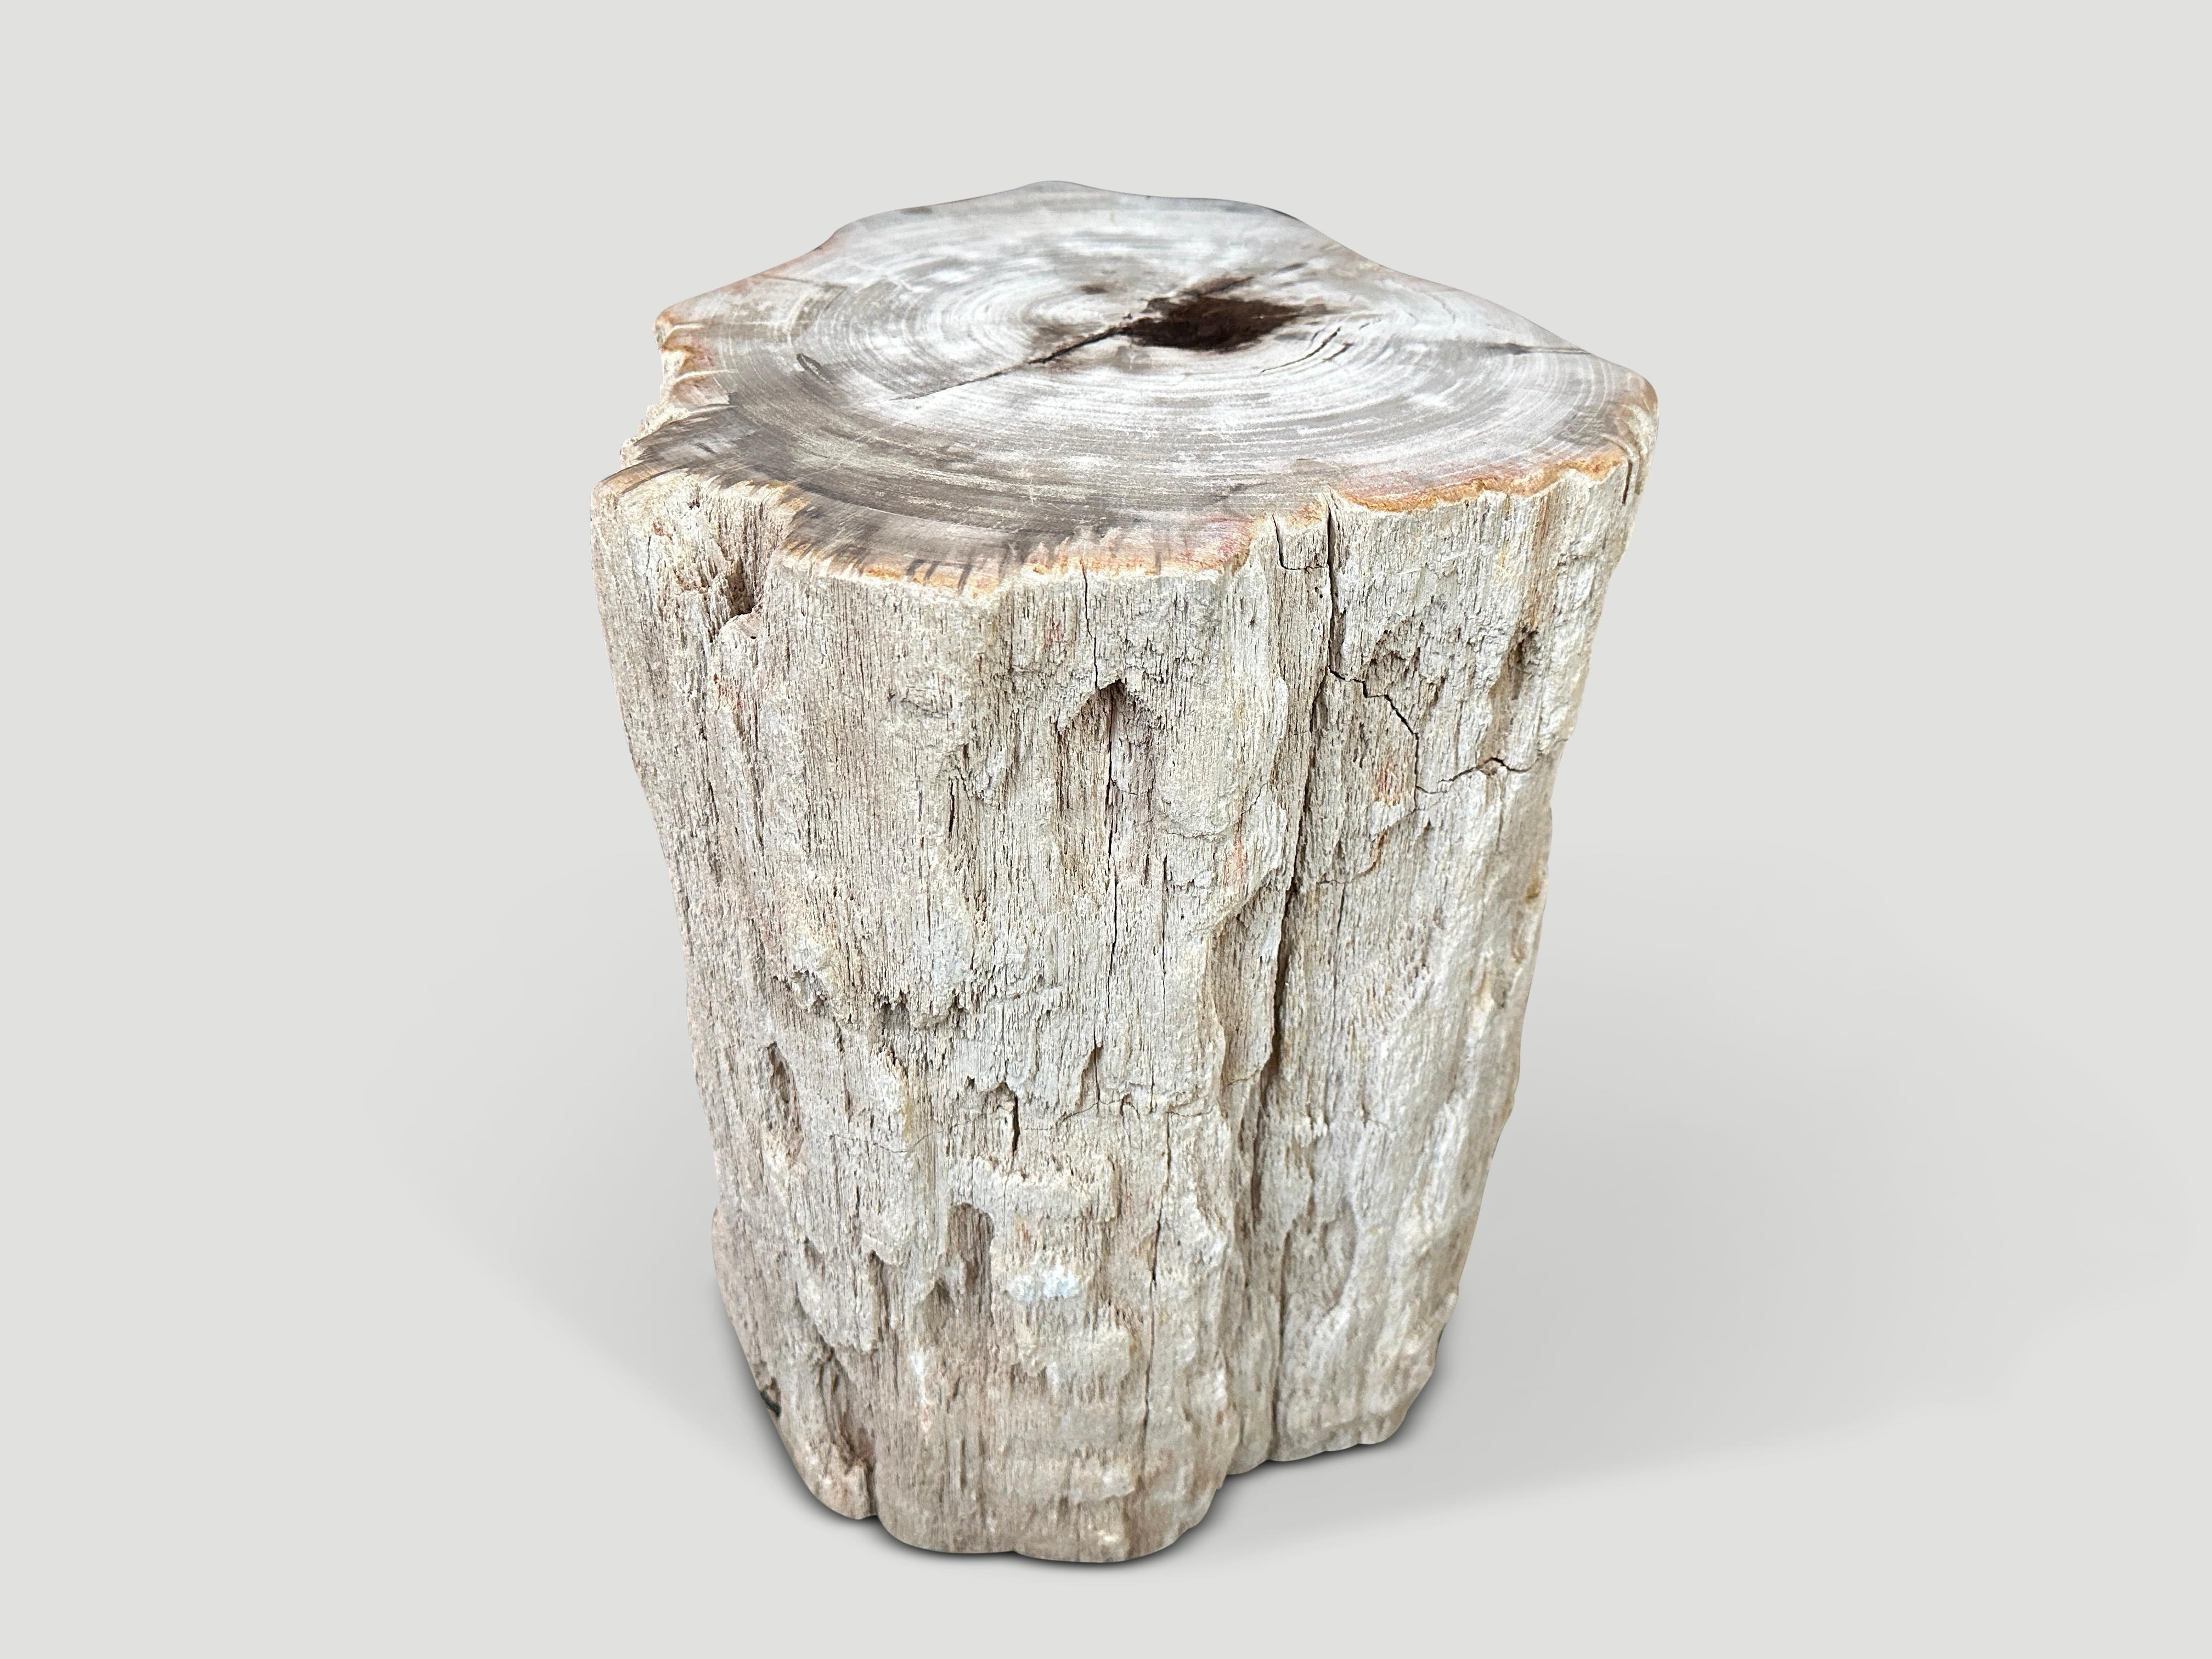 Beautiful neutral tones on this high quality petrified wood side table. A drop of resin was added to the top for usability and to preserve the natural crystals. The sides are left unpolished in contrast. We have a pair cut from the same log. The